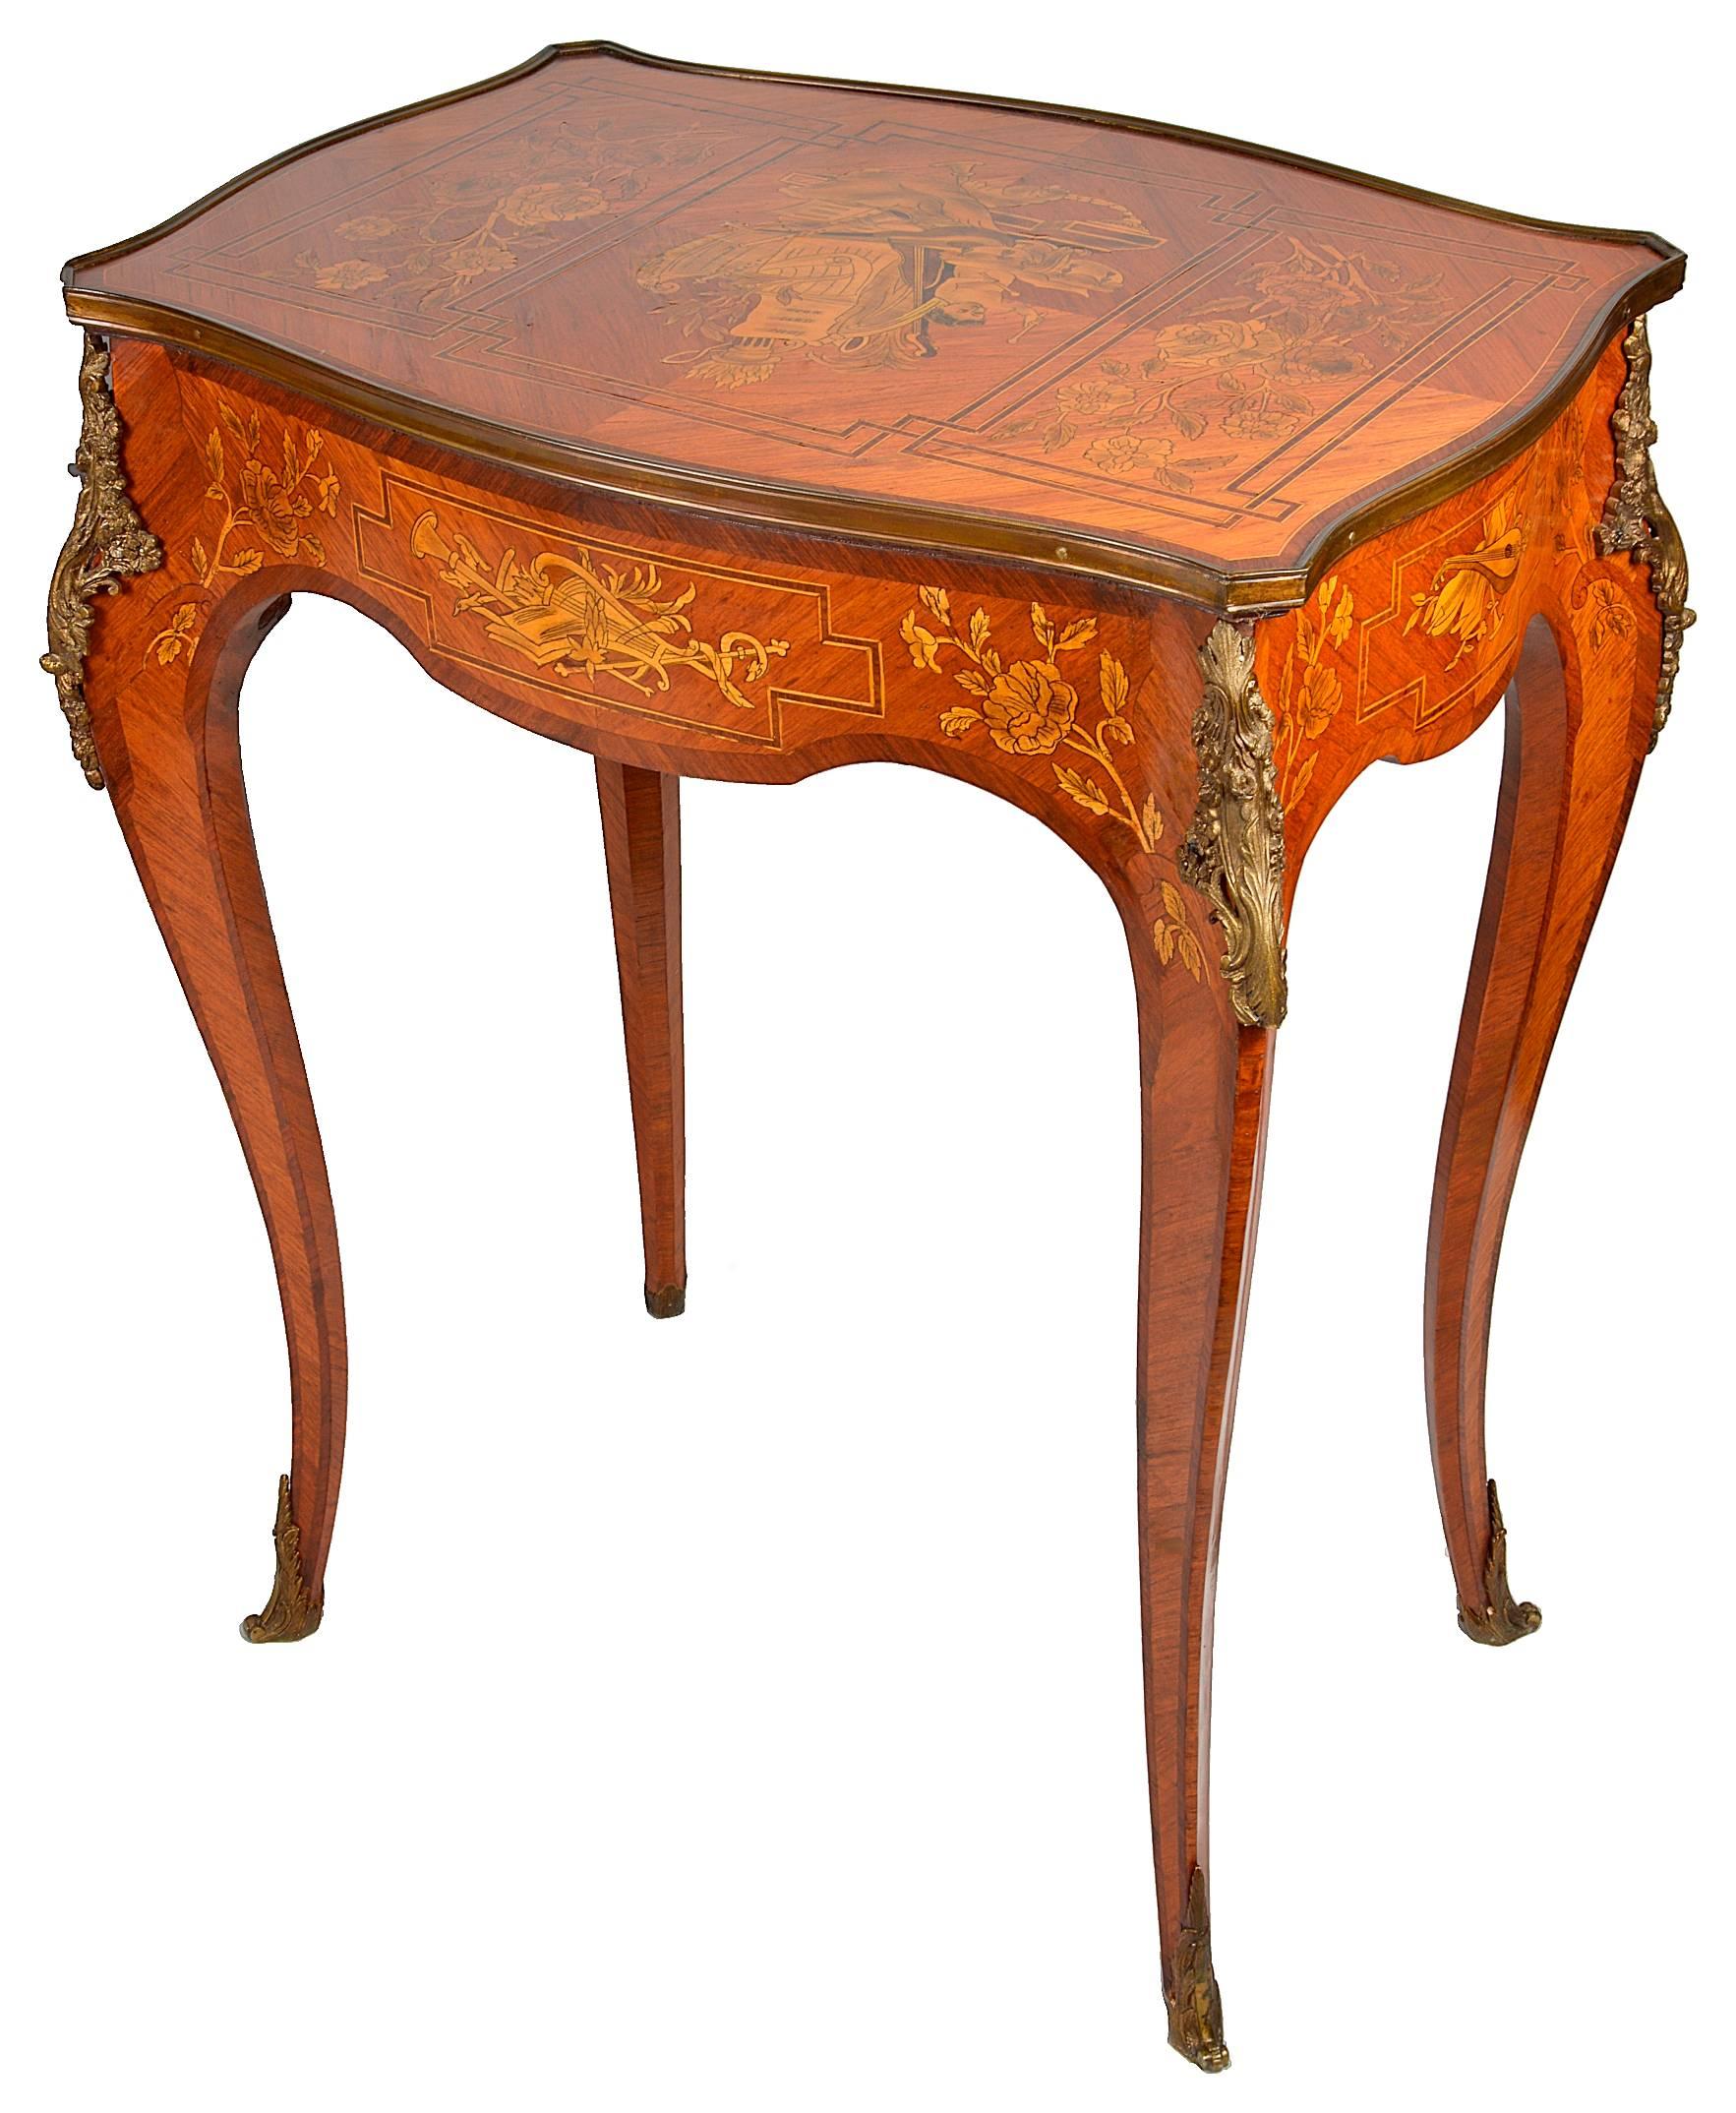 A pair of good quality French marquetry side tables in the Louis XVI style. Each having a slide, classical inlaid decoration to the tops and frieze, raised on elegant cabriole legs and ormolu mounts.